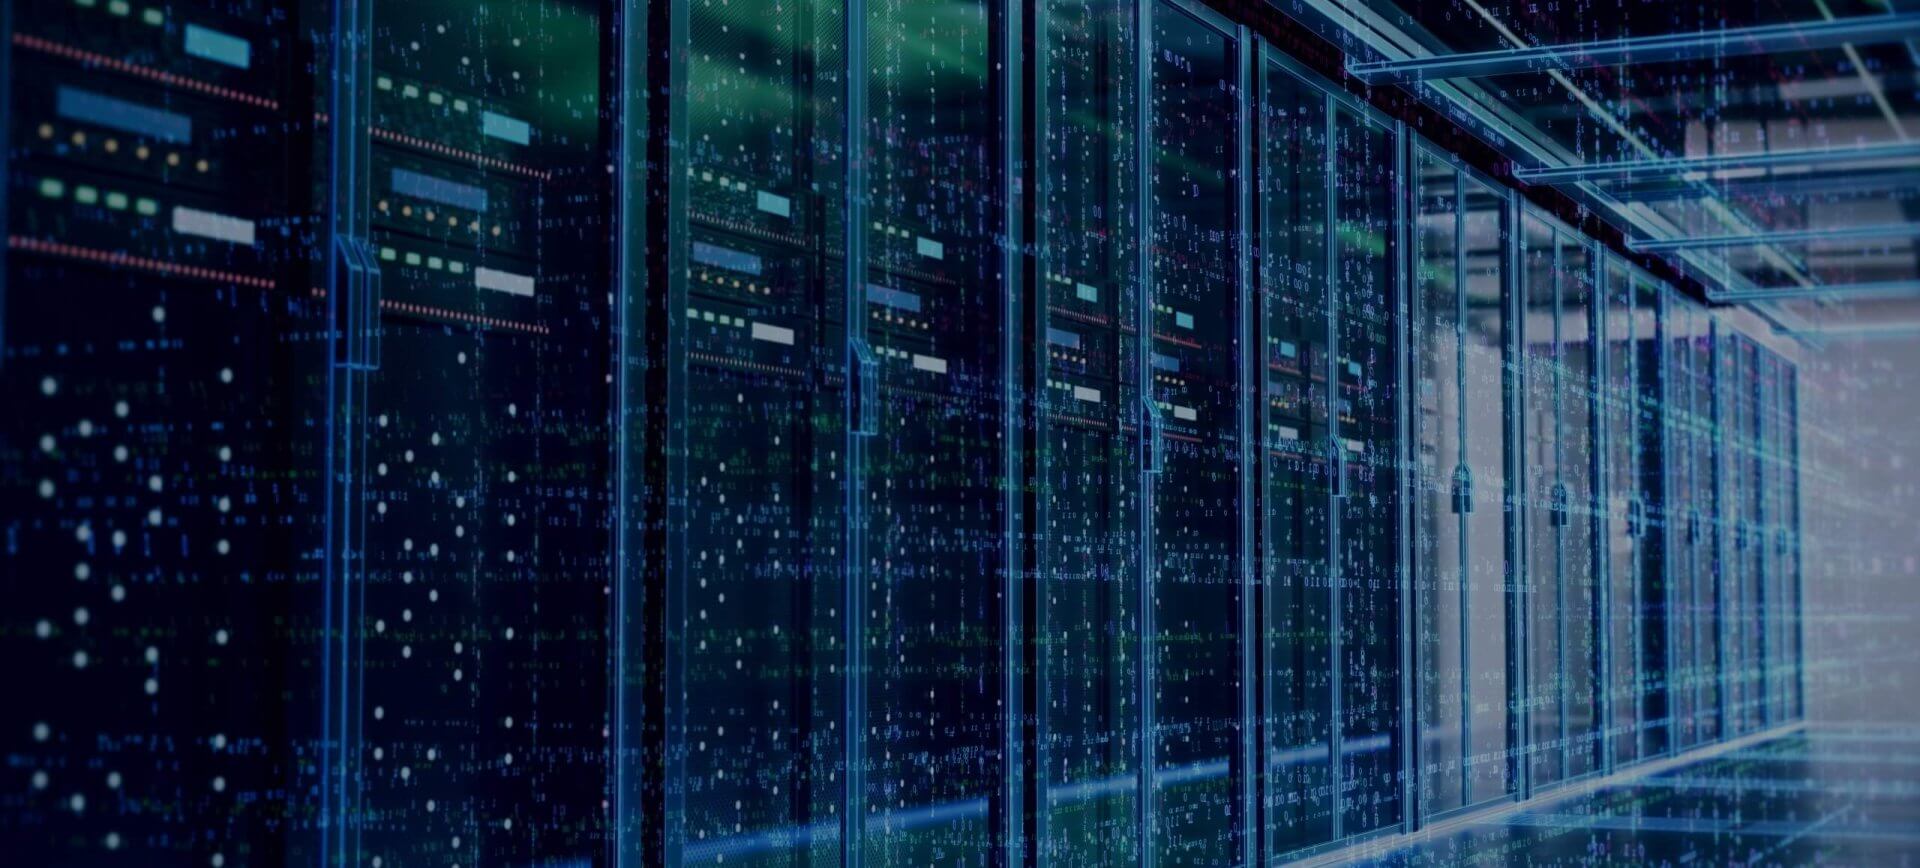 Data being processed by servers in a data centre